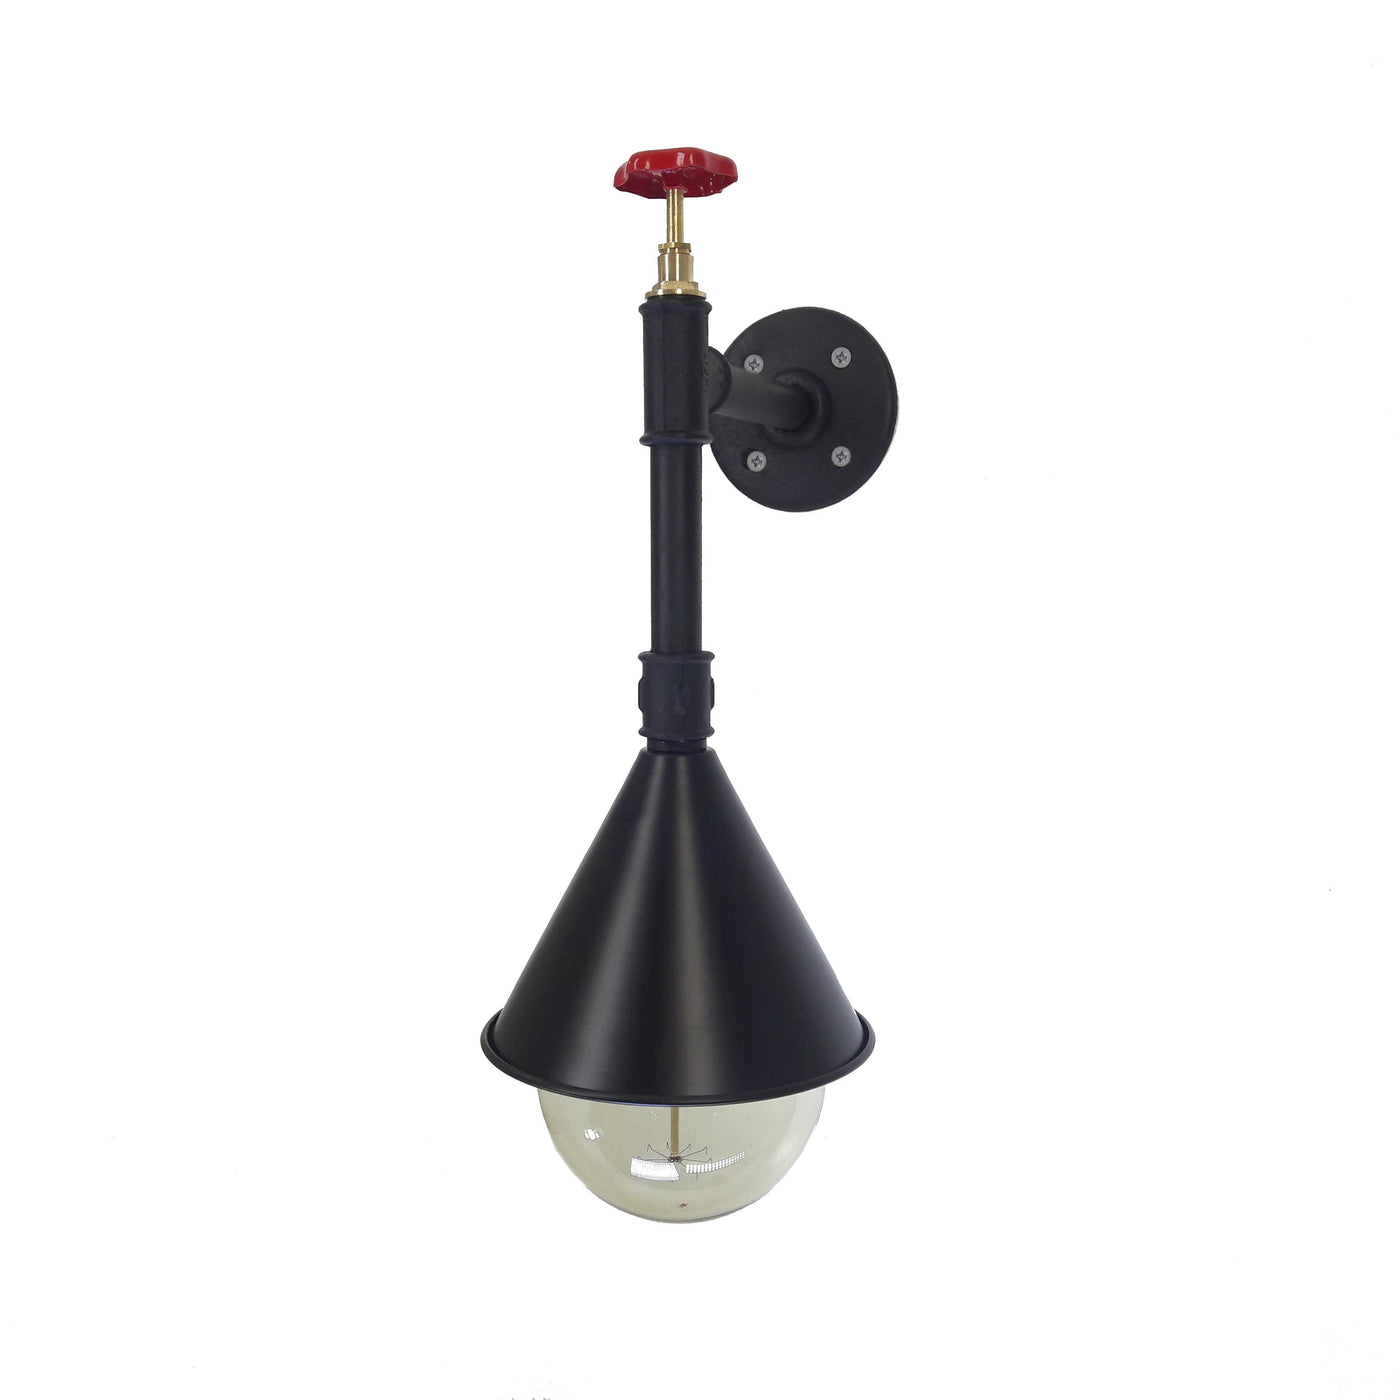 HT067 | Wall Lamp, Steampunk, Black Pipe with Red Valve